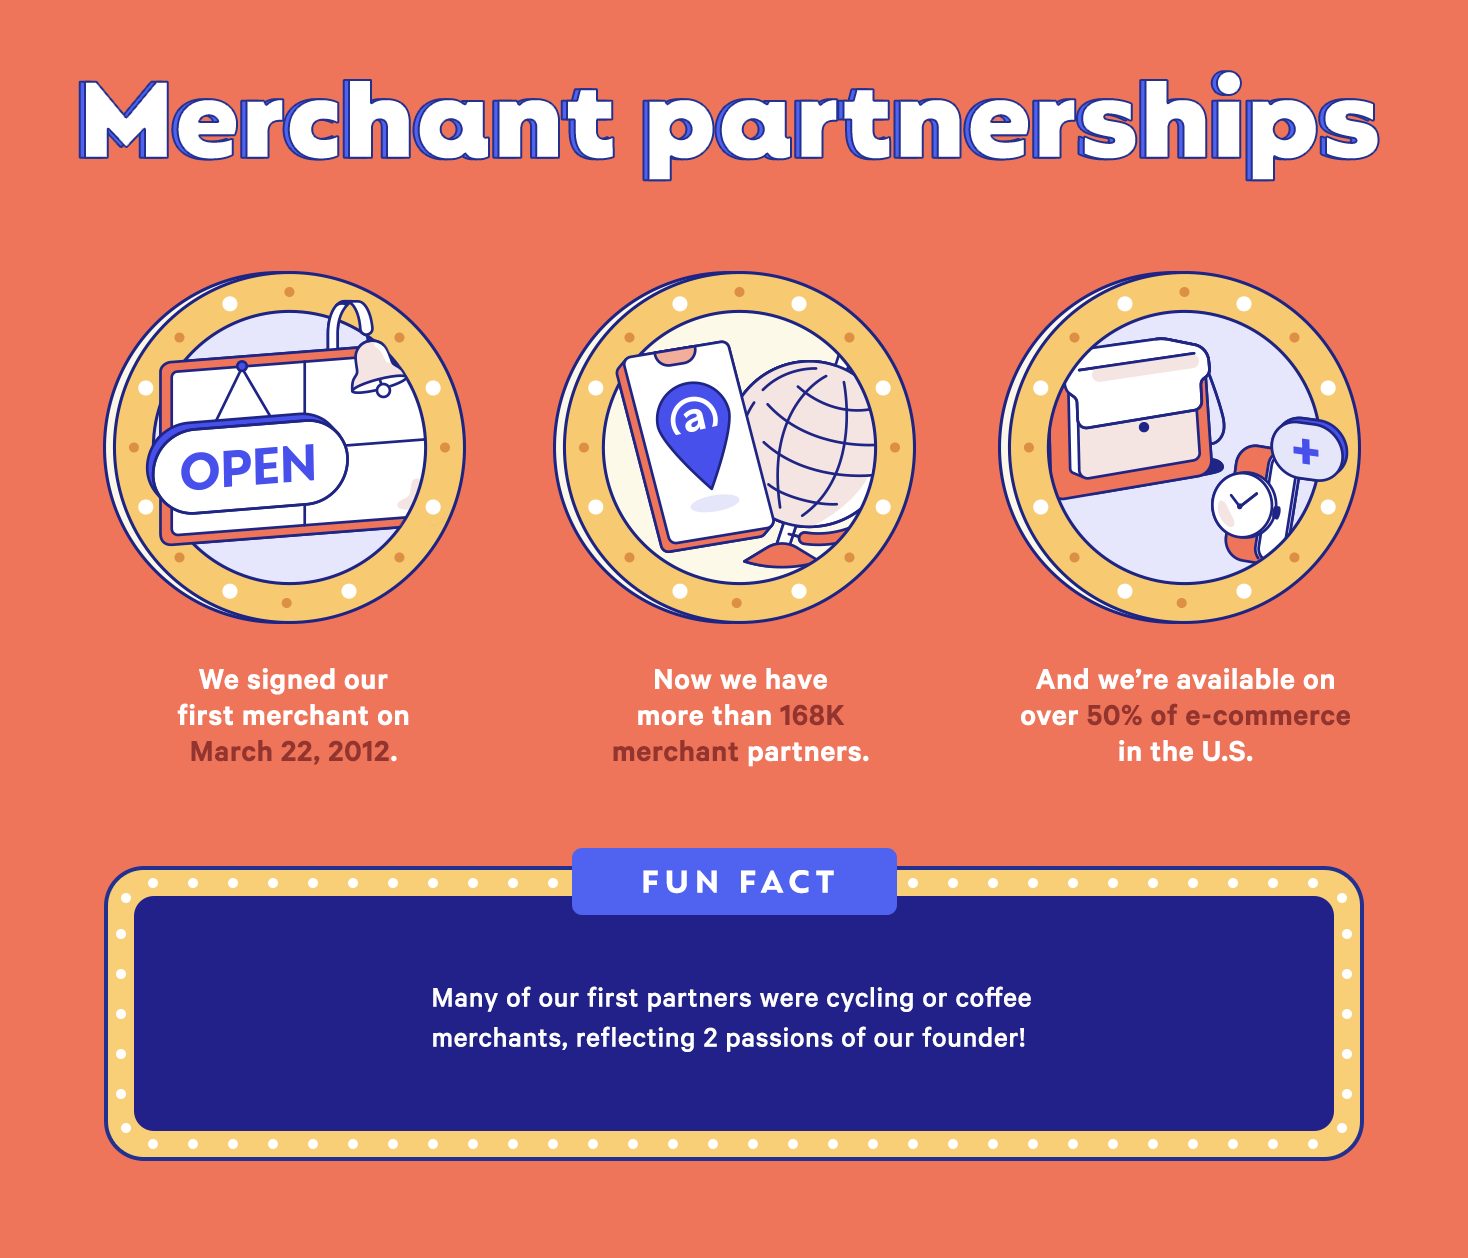 panel with details about merchant partnerships